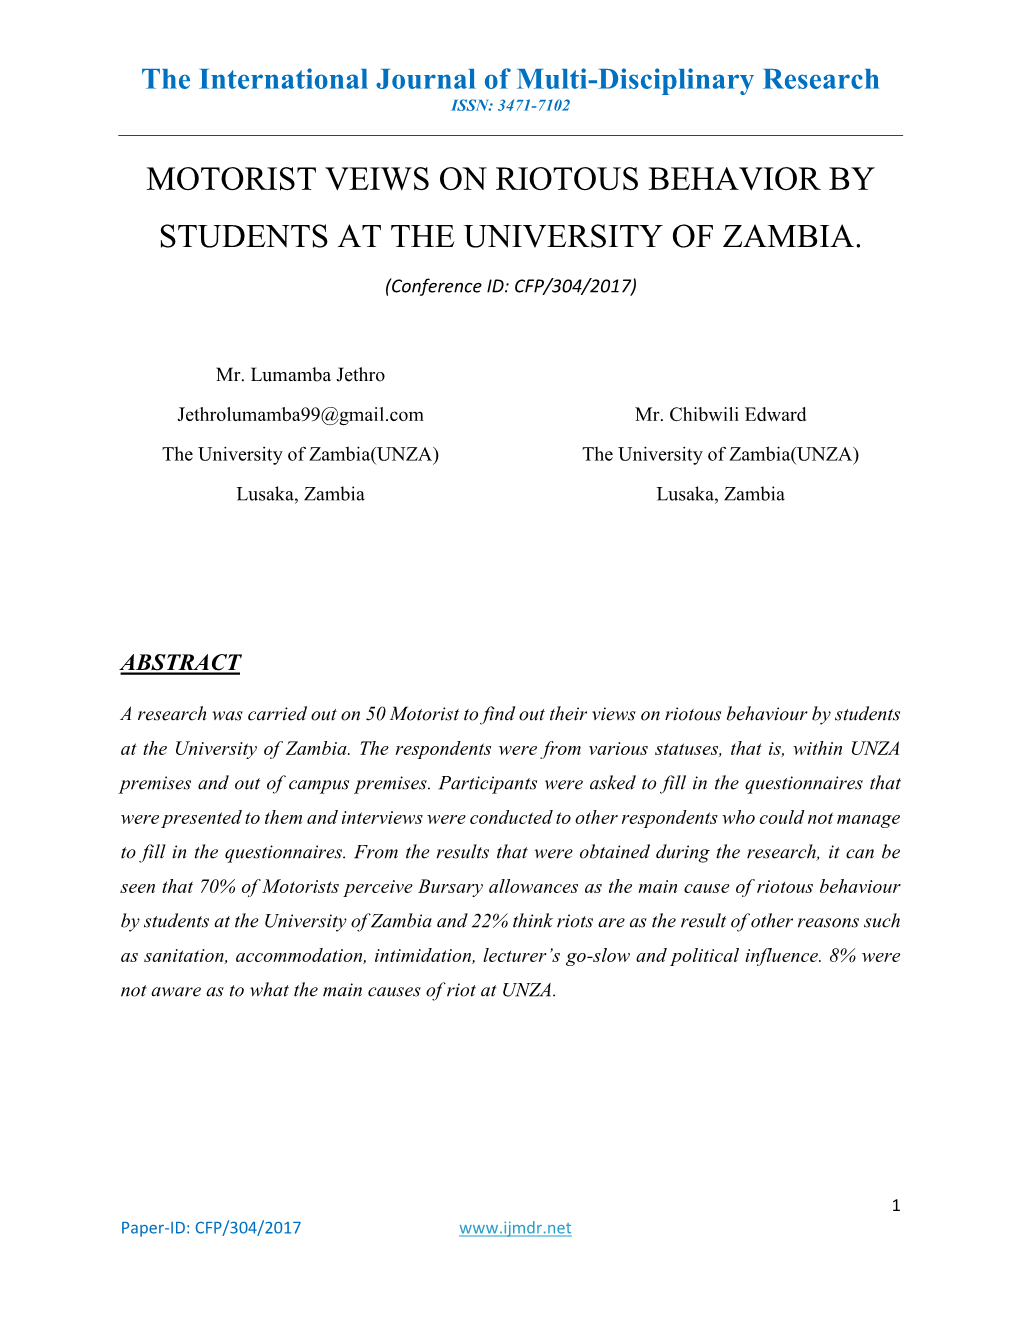 Motorist Veiws on Riotous Behavior by Students at the University of Zambia